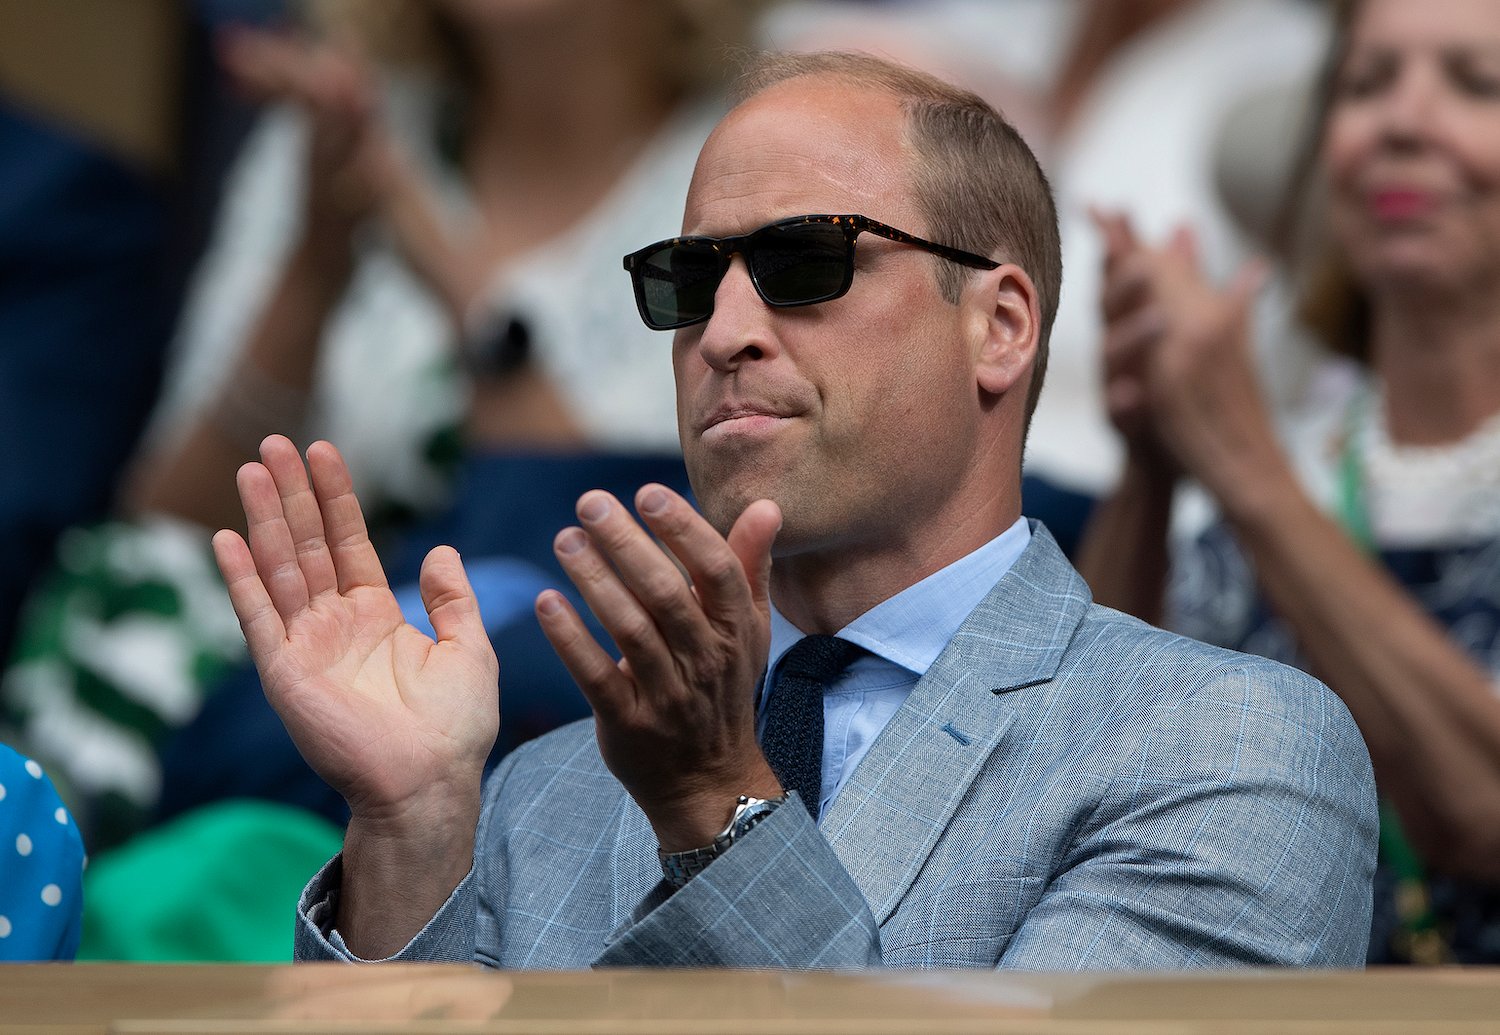 Prince William, Duke of Cambridge, wearing a suit and sunglasses.